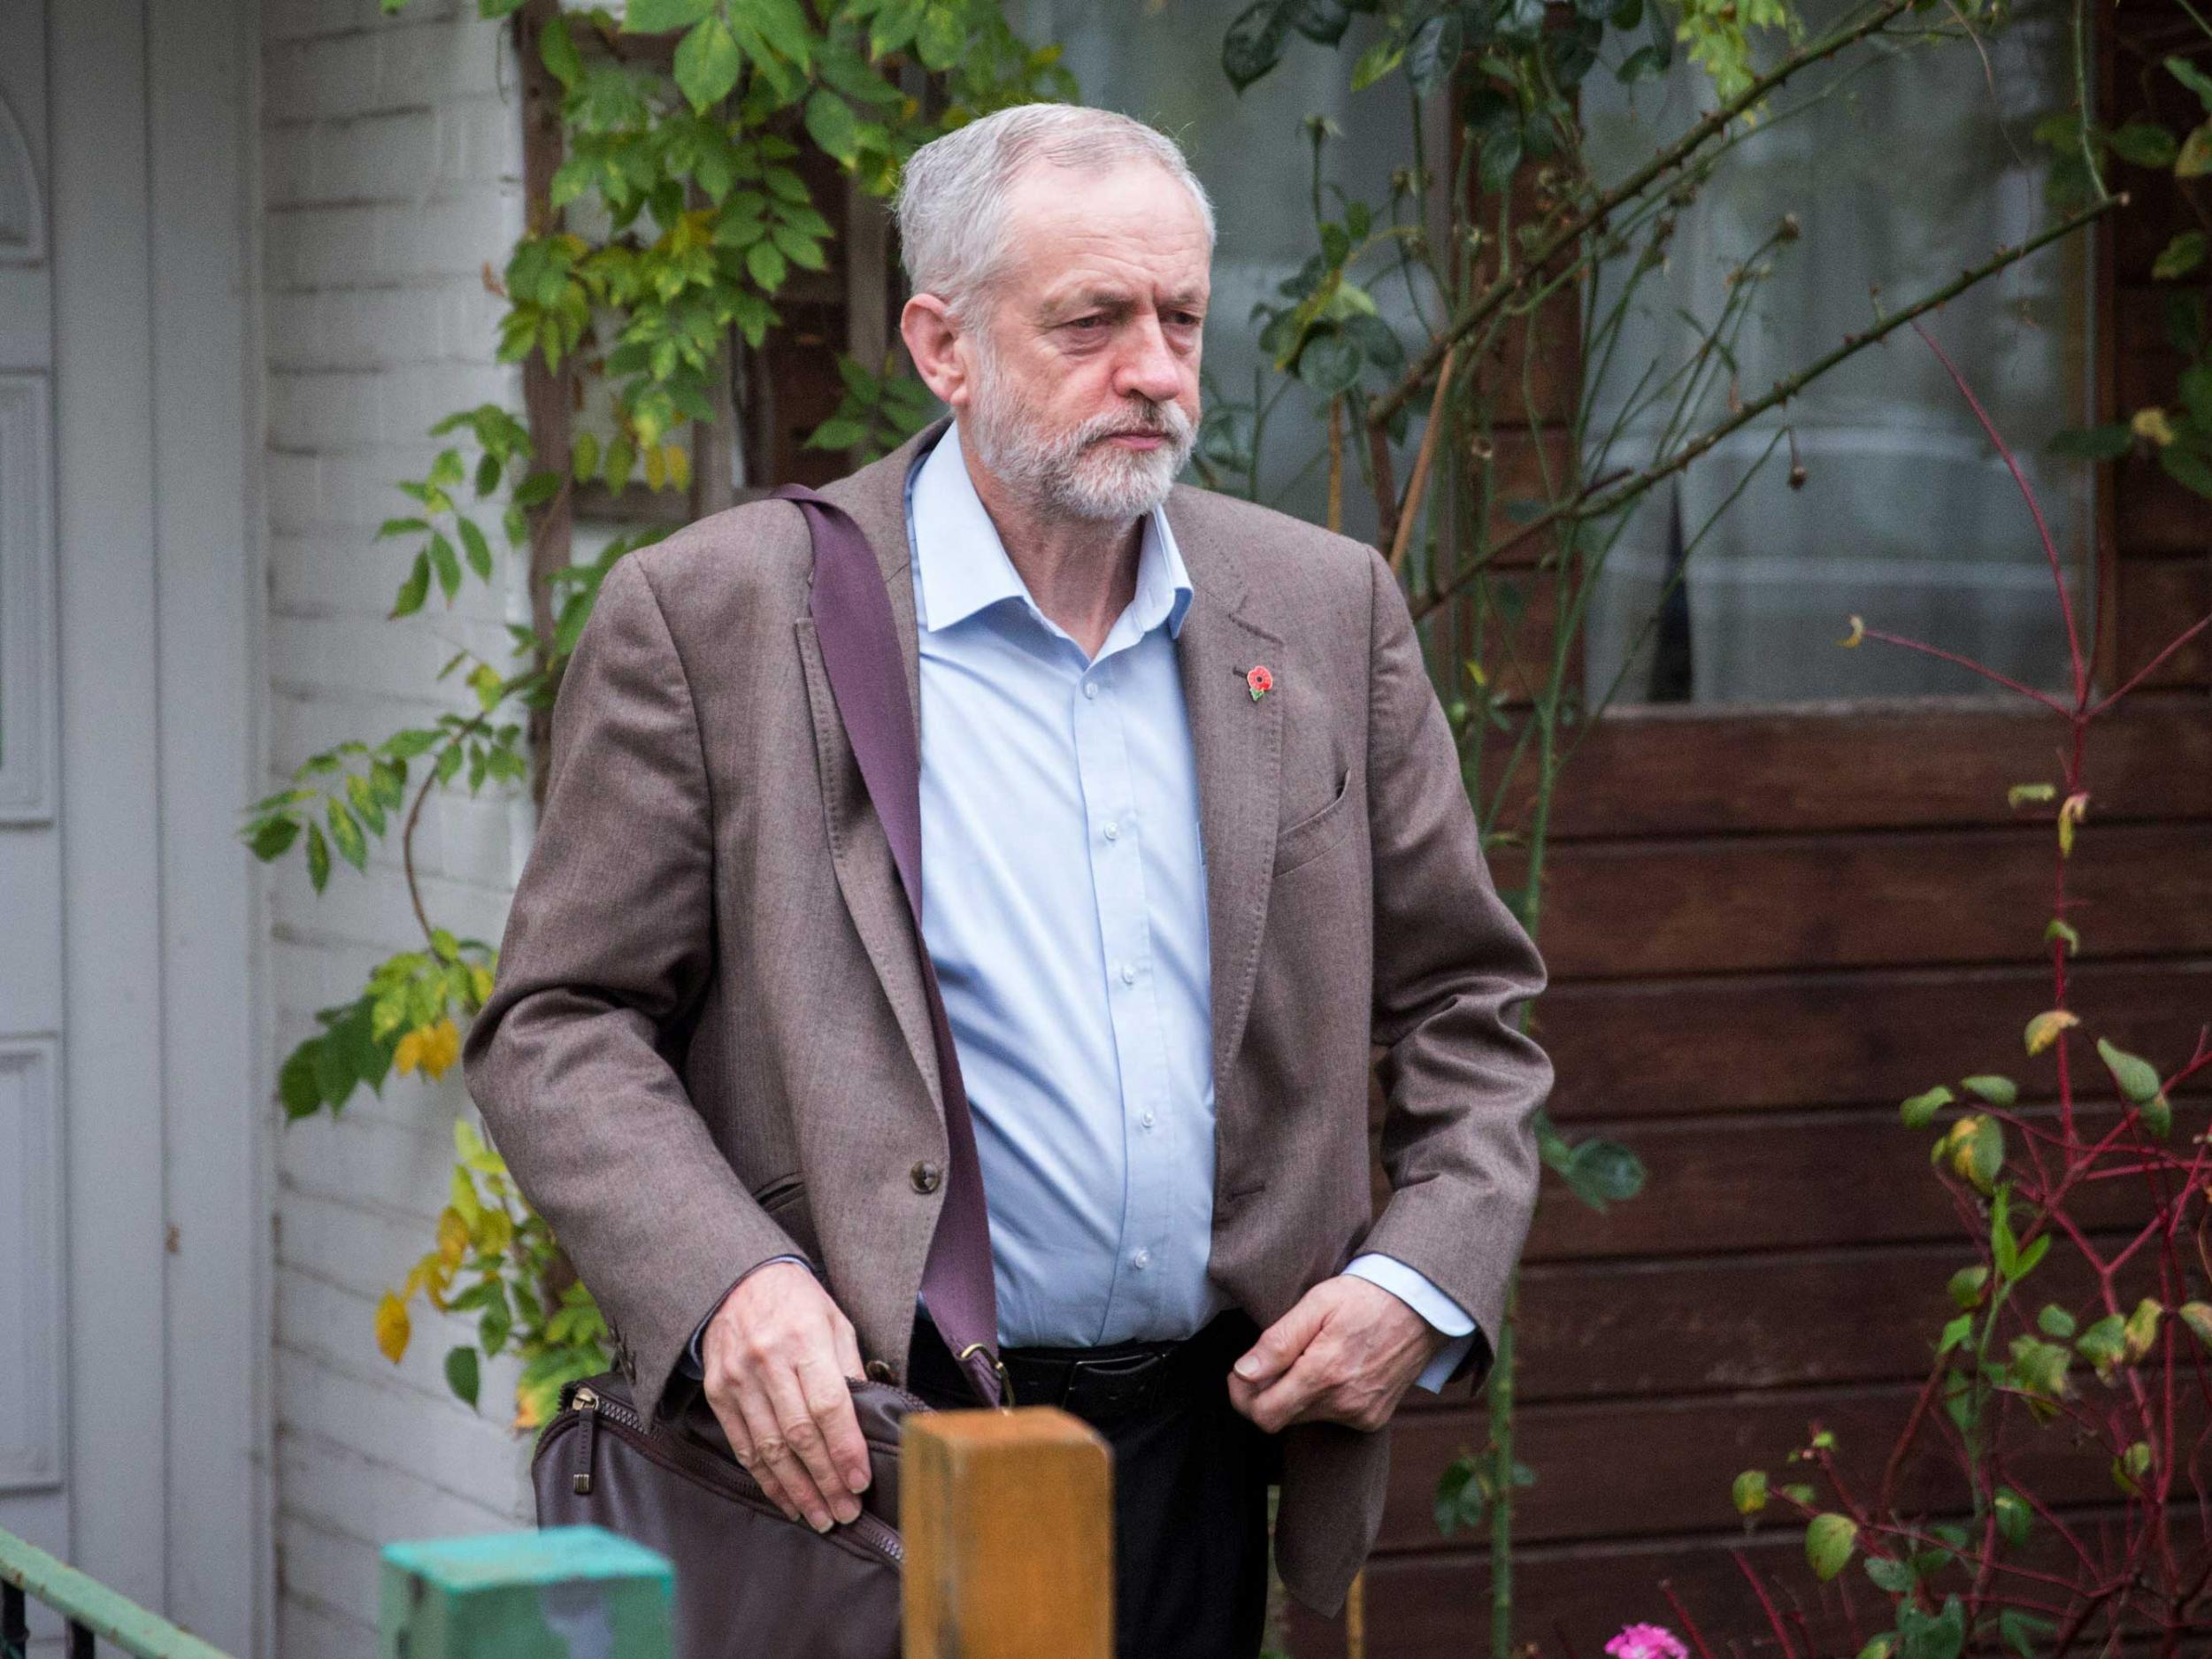 Jeremy Corbyn was criticied in the wake of the Paris attacks for saying he was 'not happy' with the idea of a shoot-to-kill policy